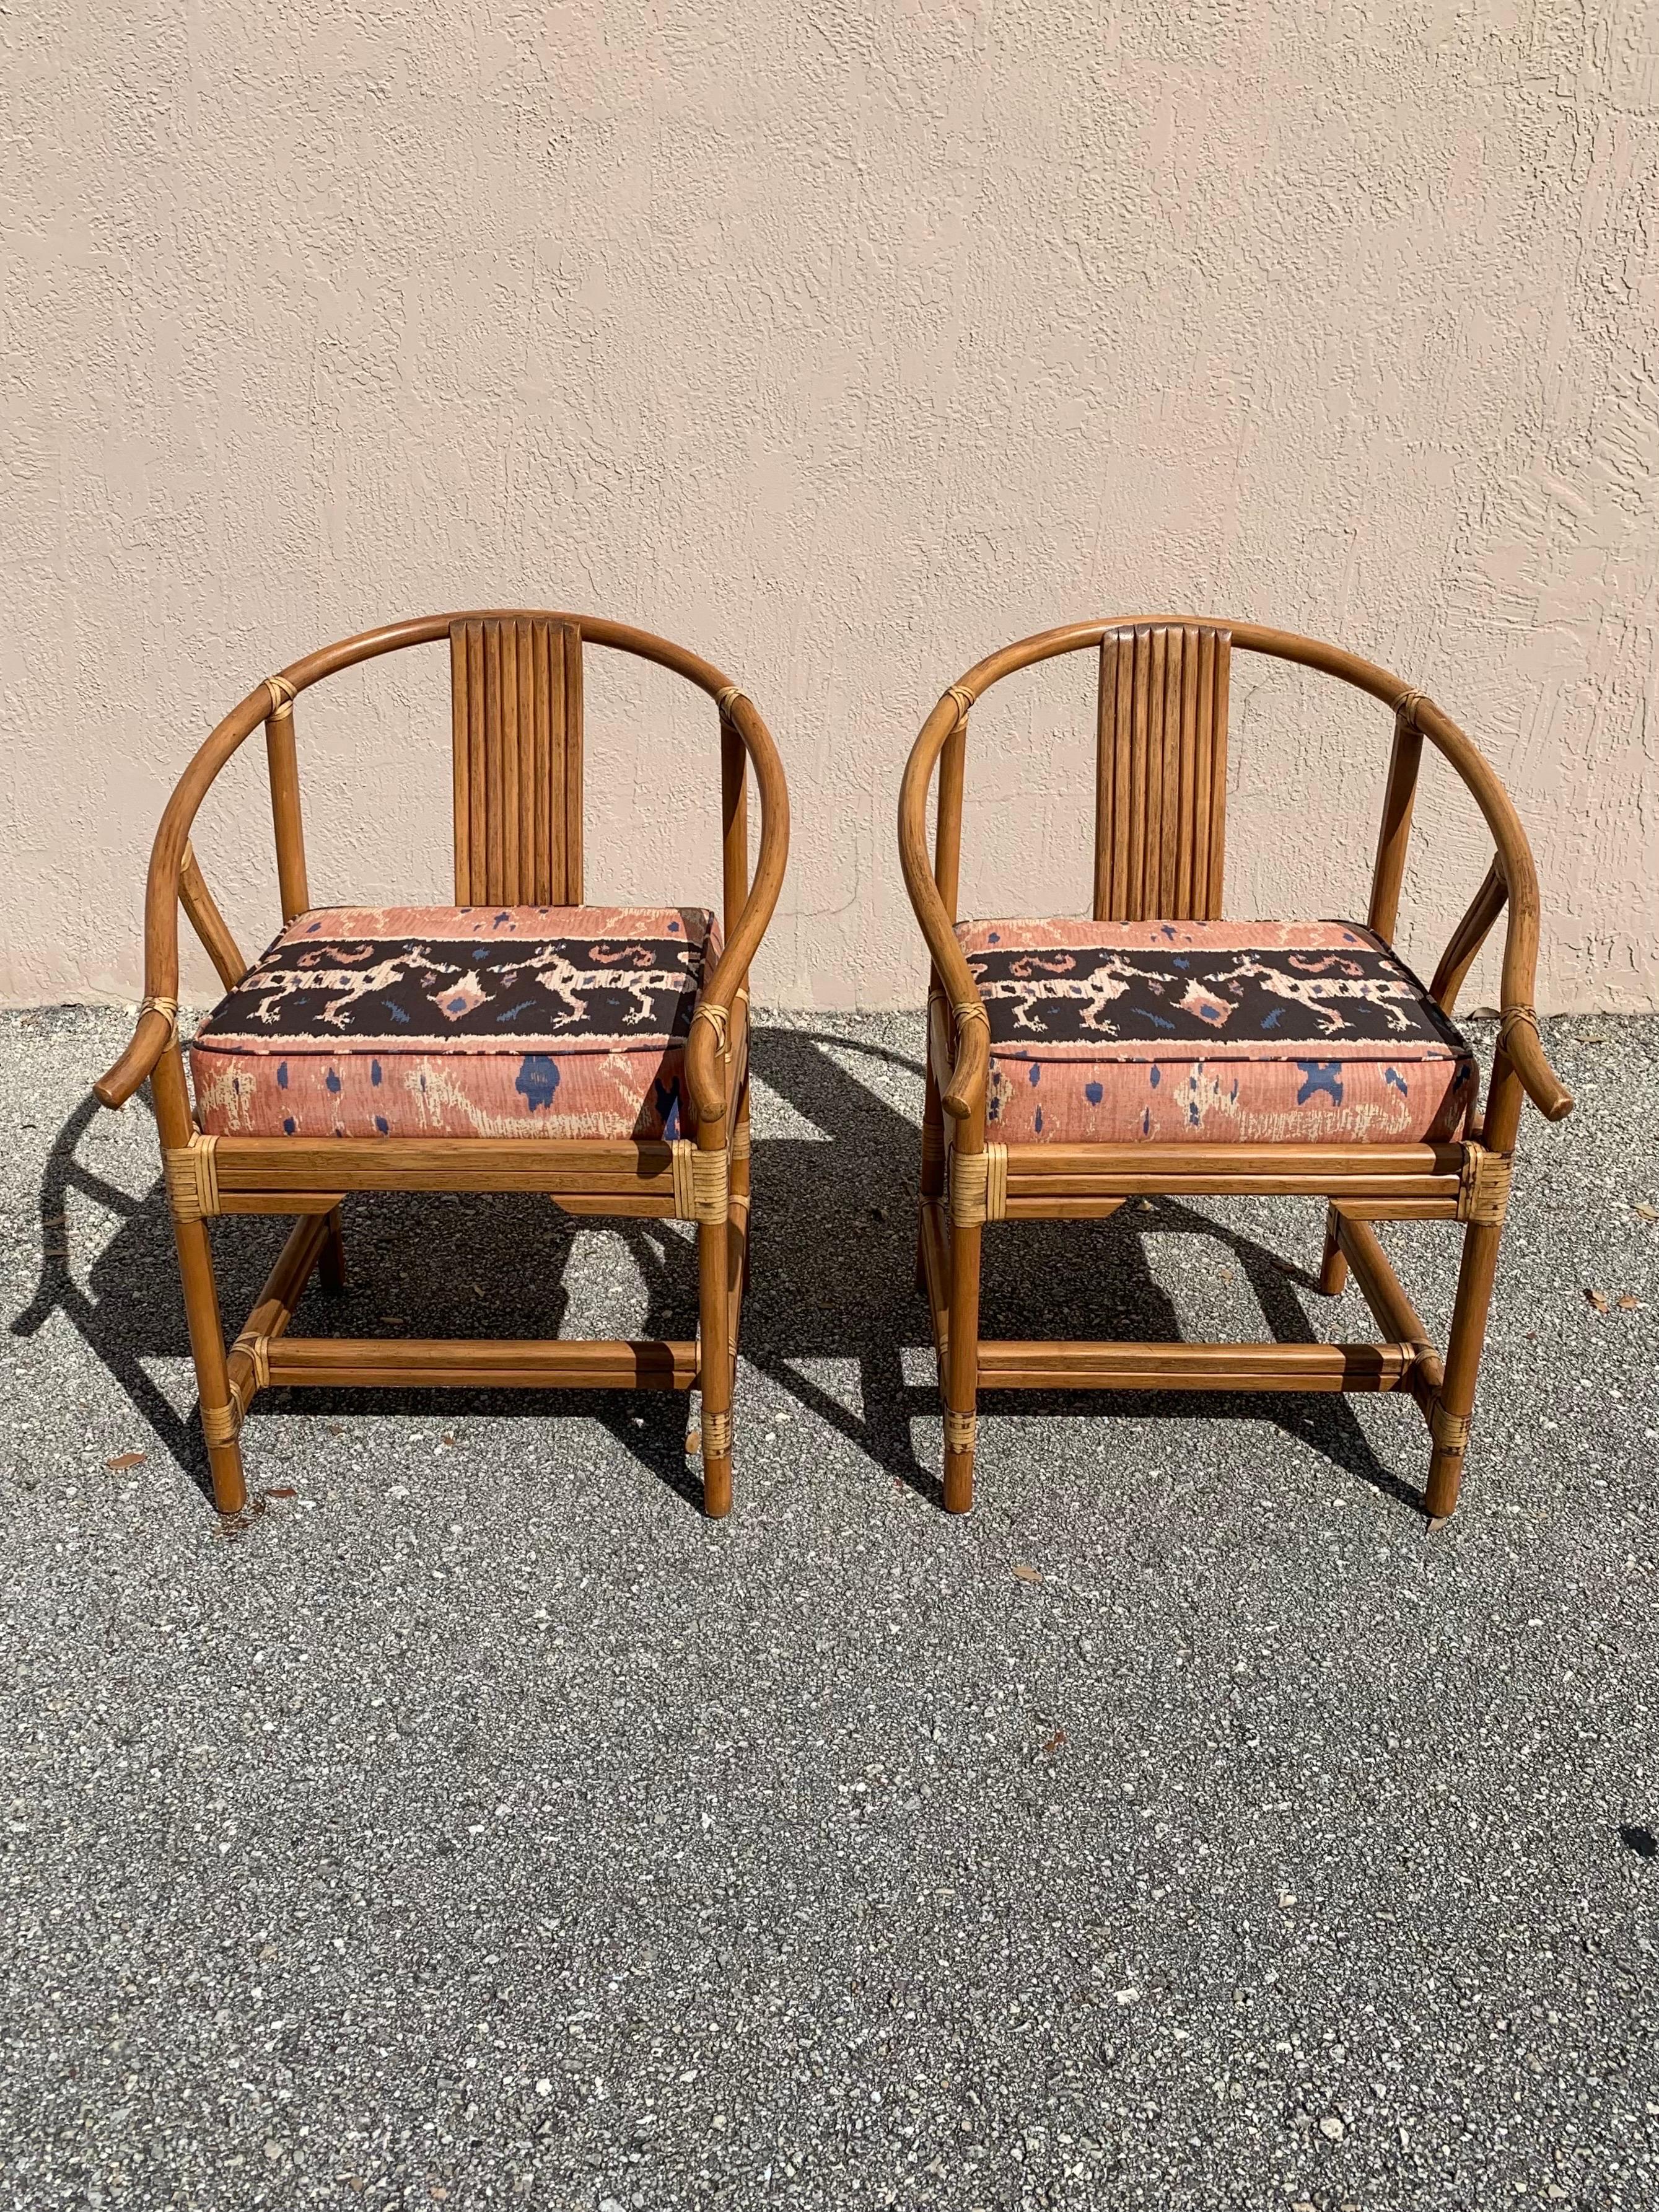 Beautiful pair of organic modern accent/lounge chairs by Ficks Reed. Carved wood affixed with leather strapping. Creating a beautiful mix of flowing and clean crisp lines. Unique fabric on a thick comfortable cushion. 

Mid 20th century design.